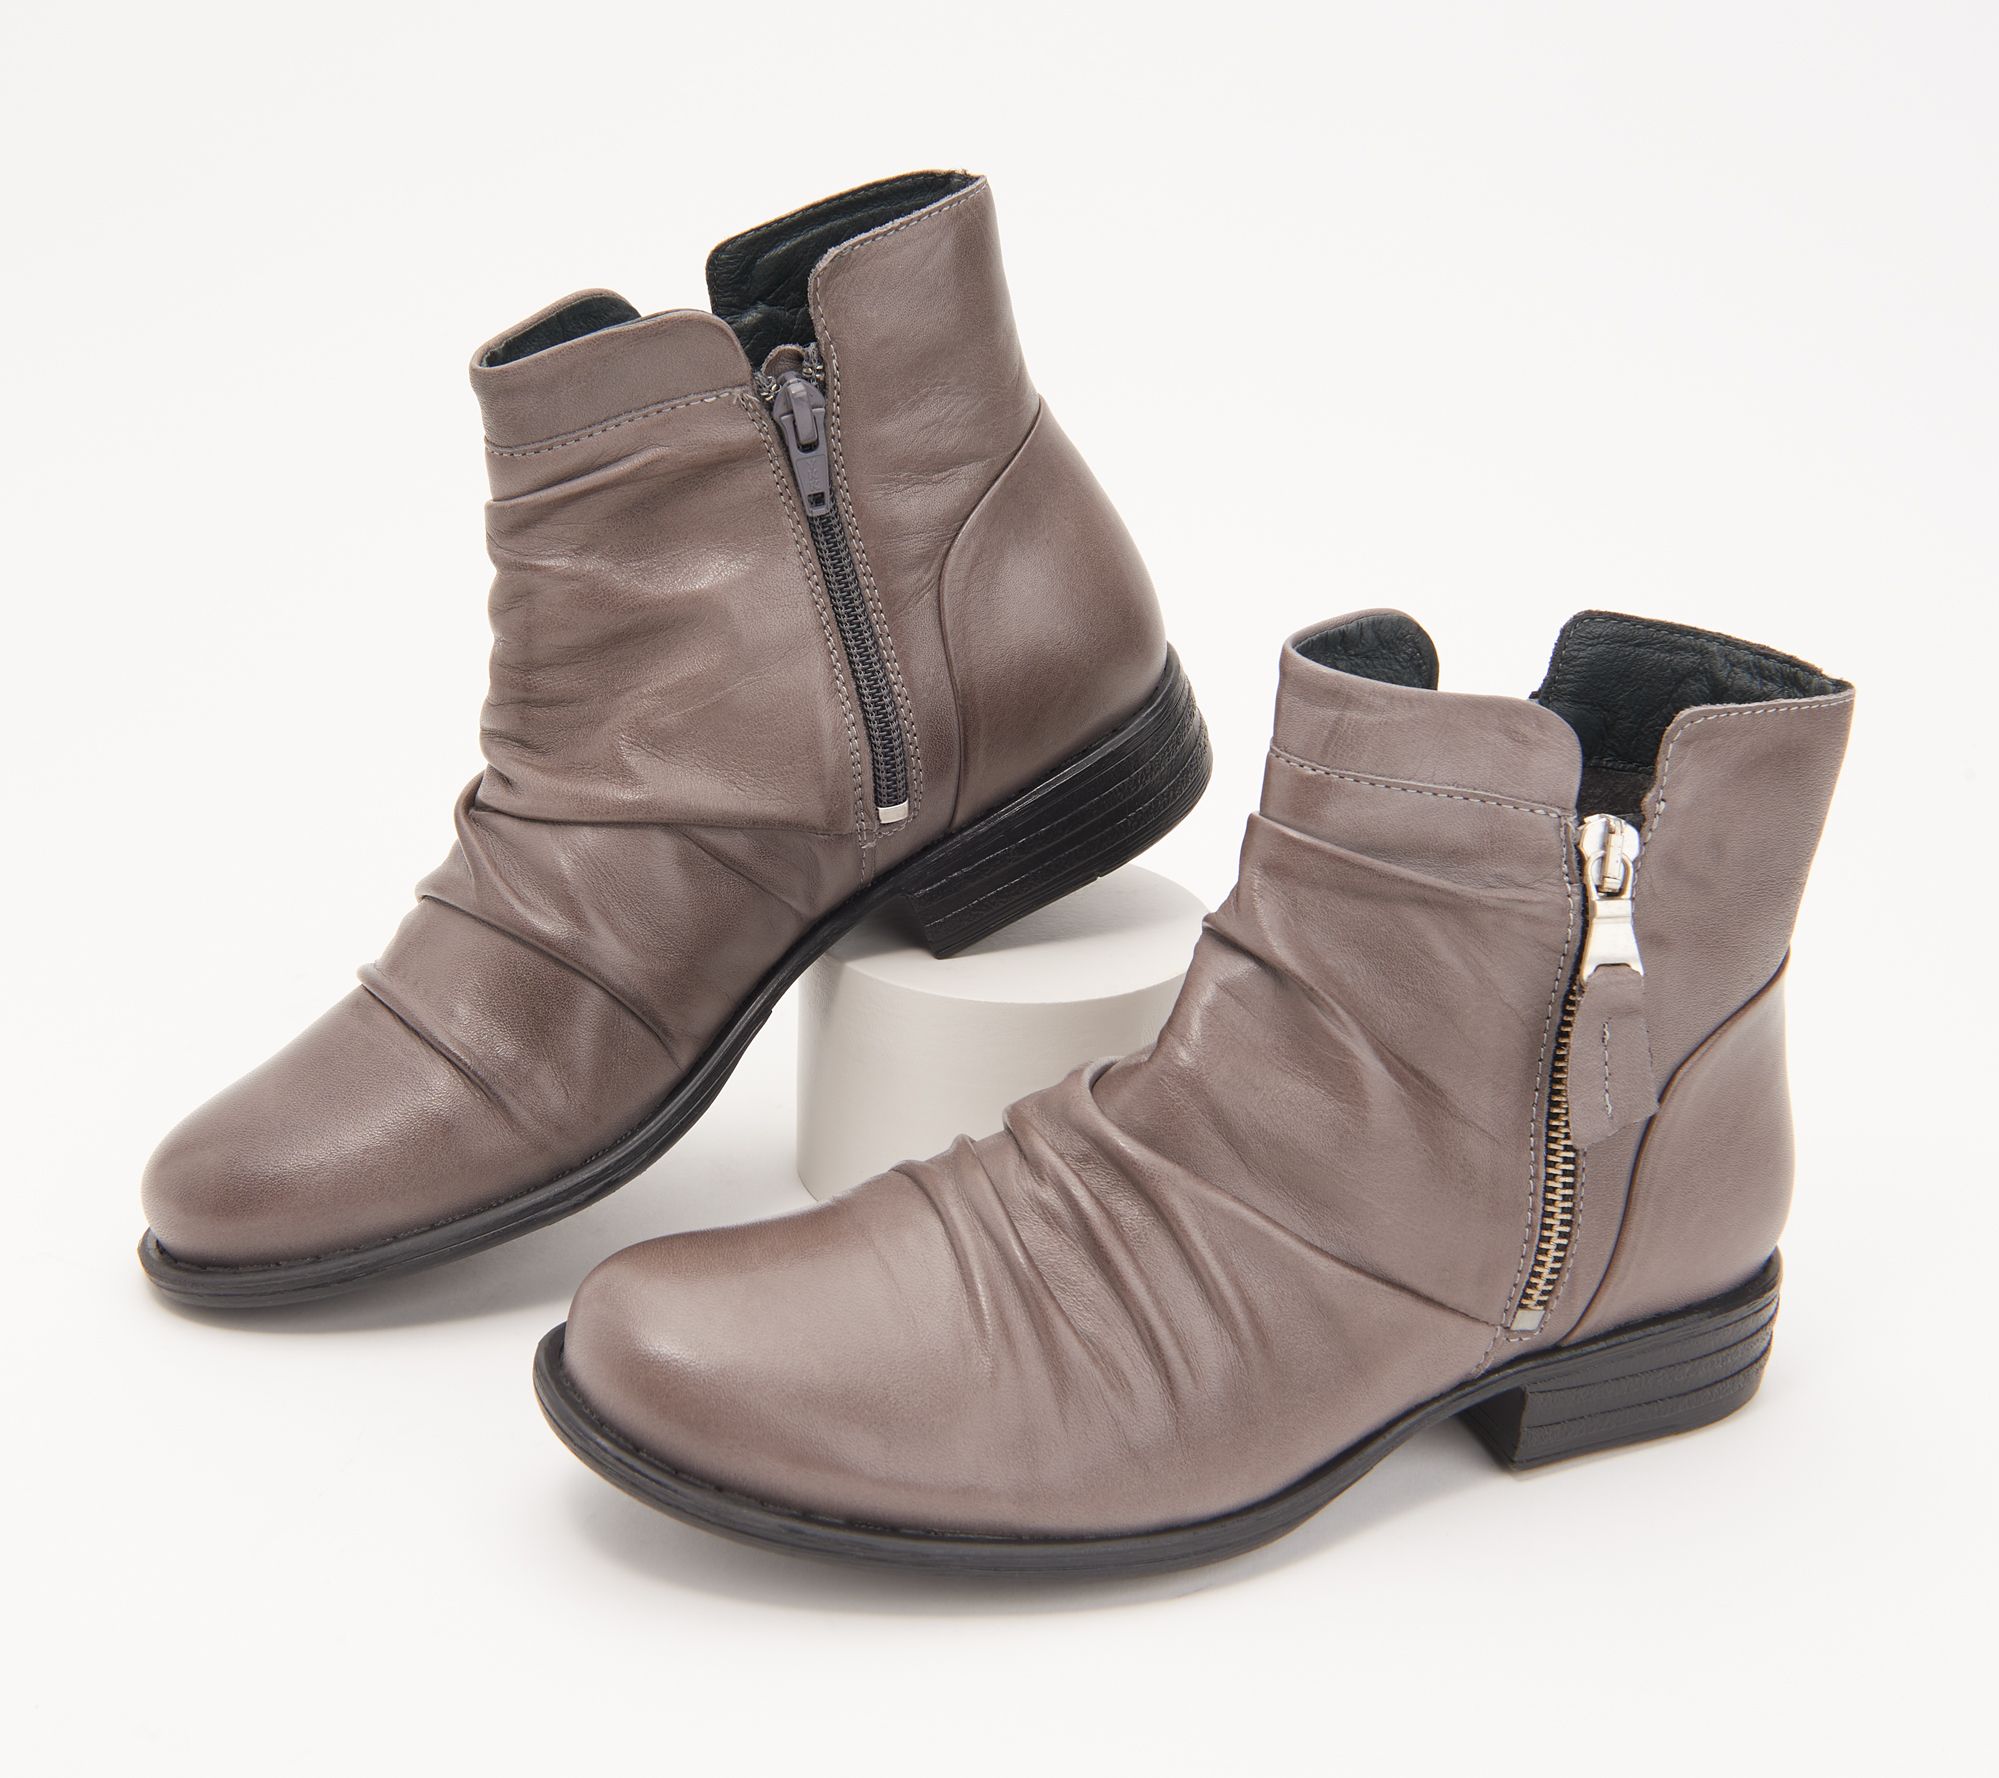 leather wide width booties